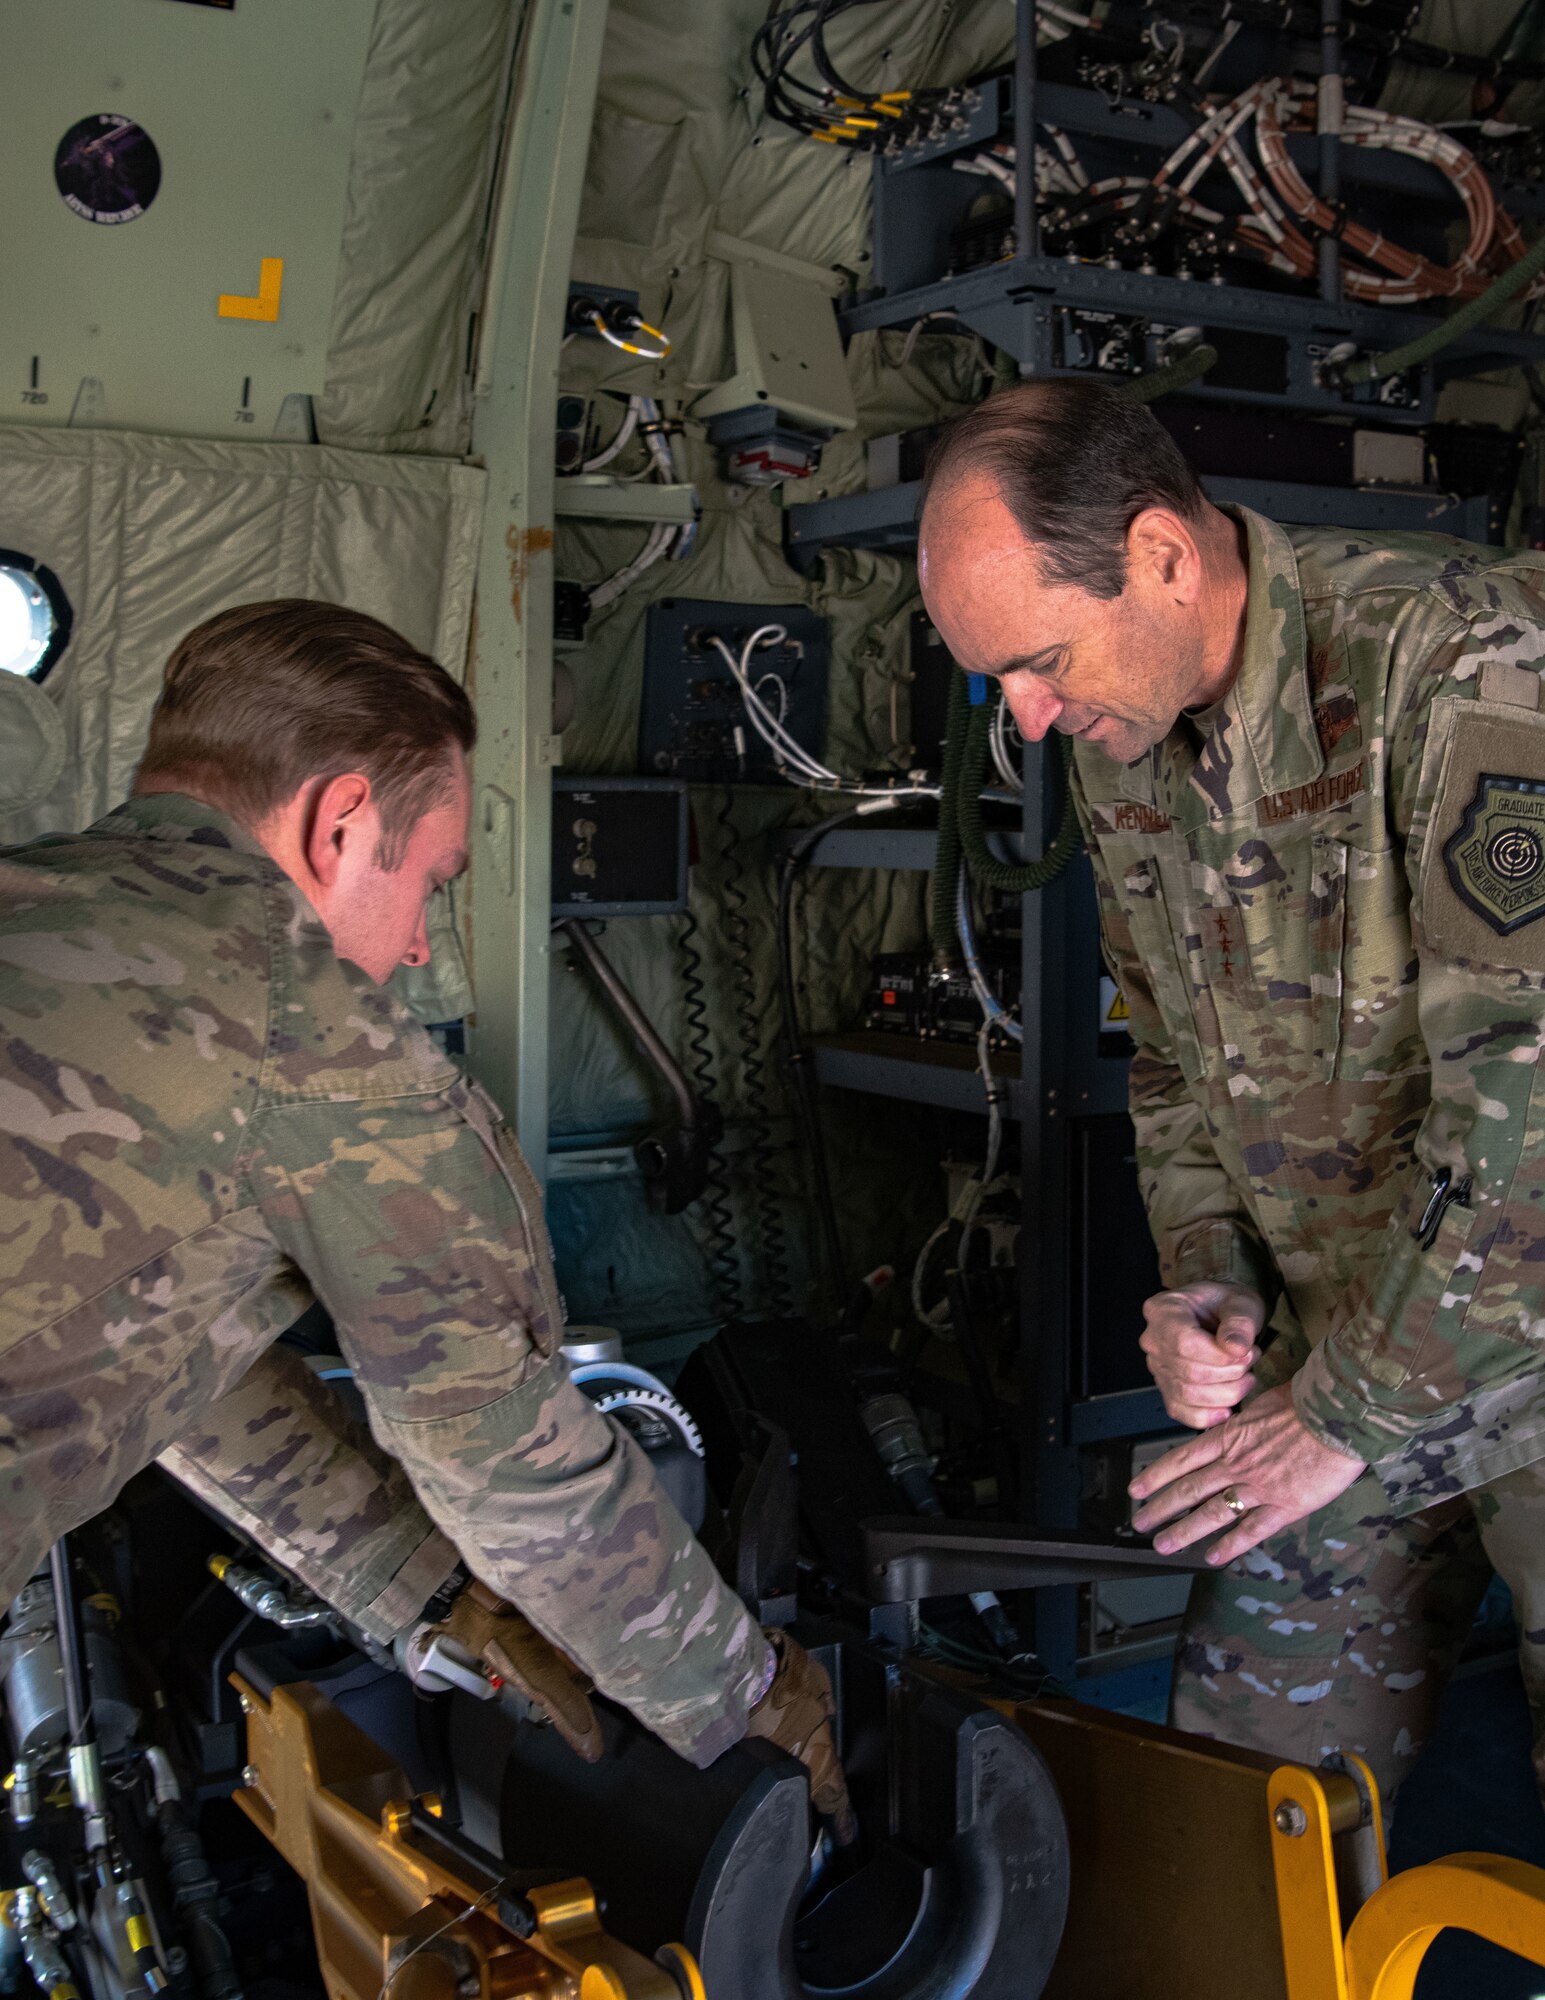 Two men in military uniform load a cannon inside a military aircraft.